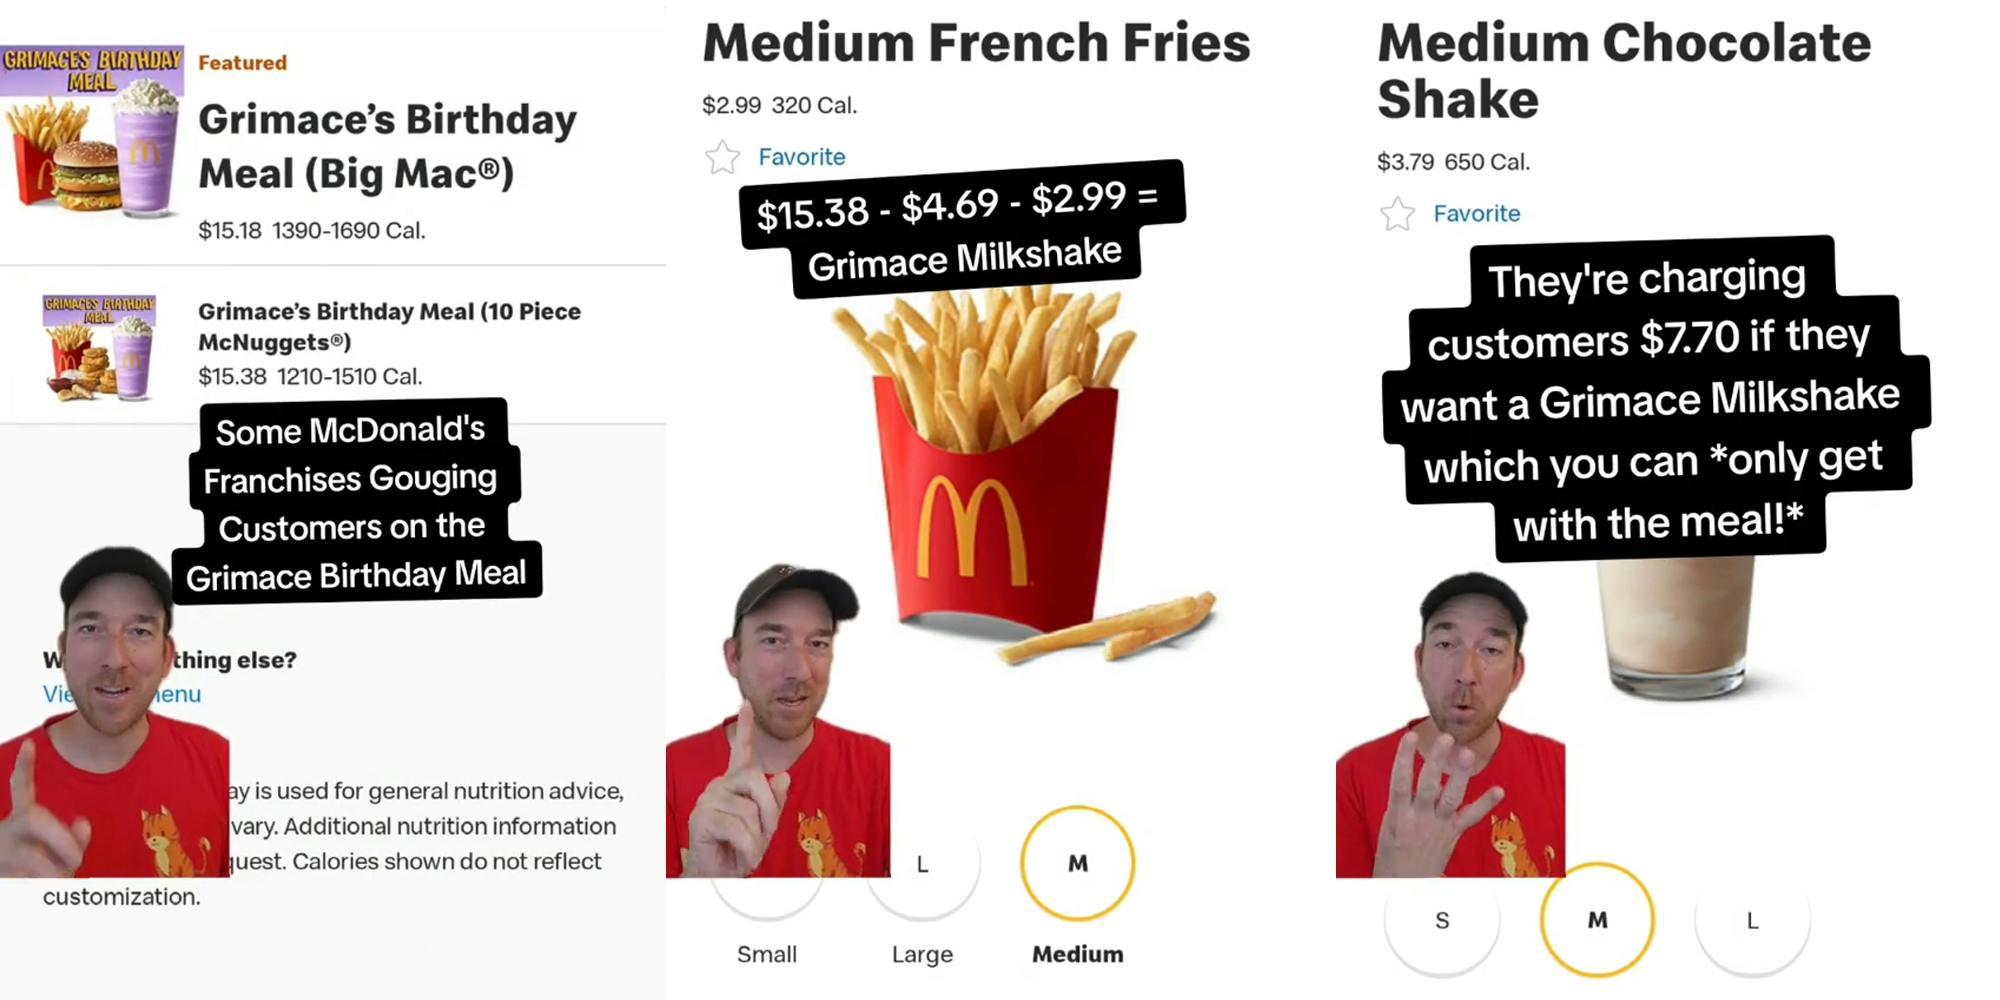 McDonald's customer greenscreen TikTok over McDonald's menu with caption "Some McDonald's Franchises Gouging customers on the Grimace Birthday Meal" (l) McDonald's customer greenscreen TikTok over McDonald's menu with caption "$15.38-$4.69-$2.99= Grimace Milkshake" (c) McDonald's customer greenscreen TikTok over McDonald's menu with caption "They're charging customers $7.70 if they want a Grimace Milkshake which you can *only get with the meal!*" (r)